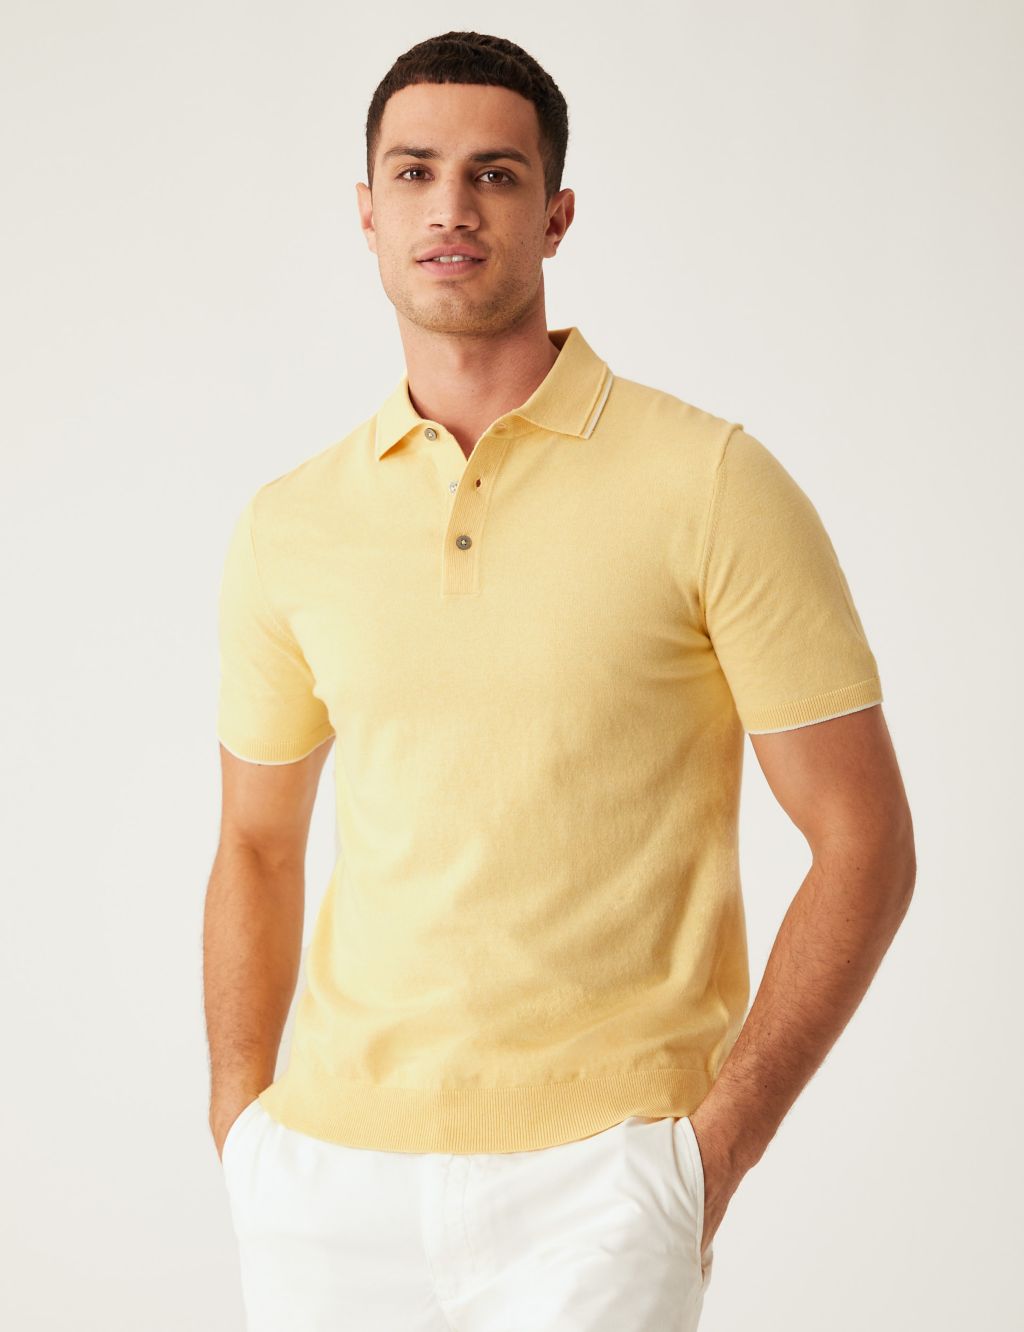 Cotton Rich Short Sleeve Knitted Polo Shirt image 1